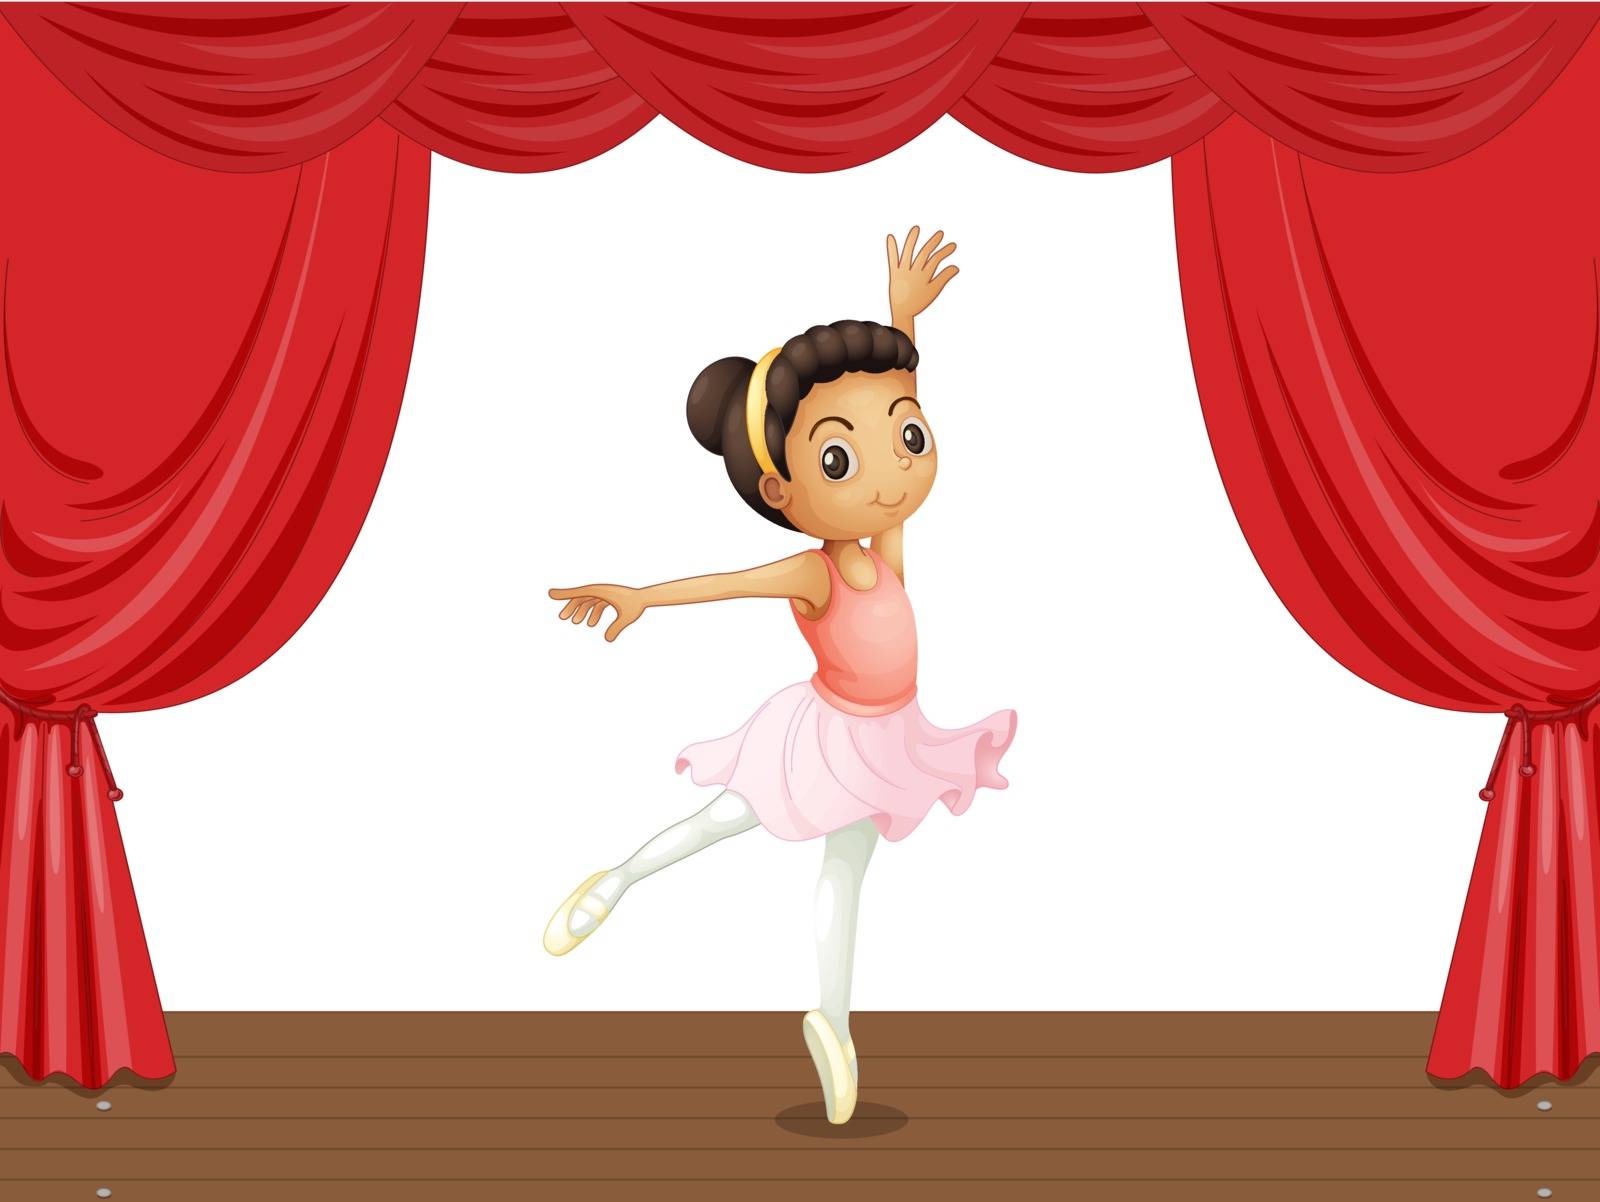 Ballerina on a stage with red curtains